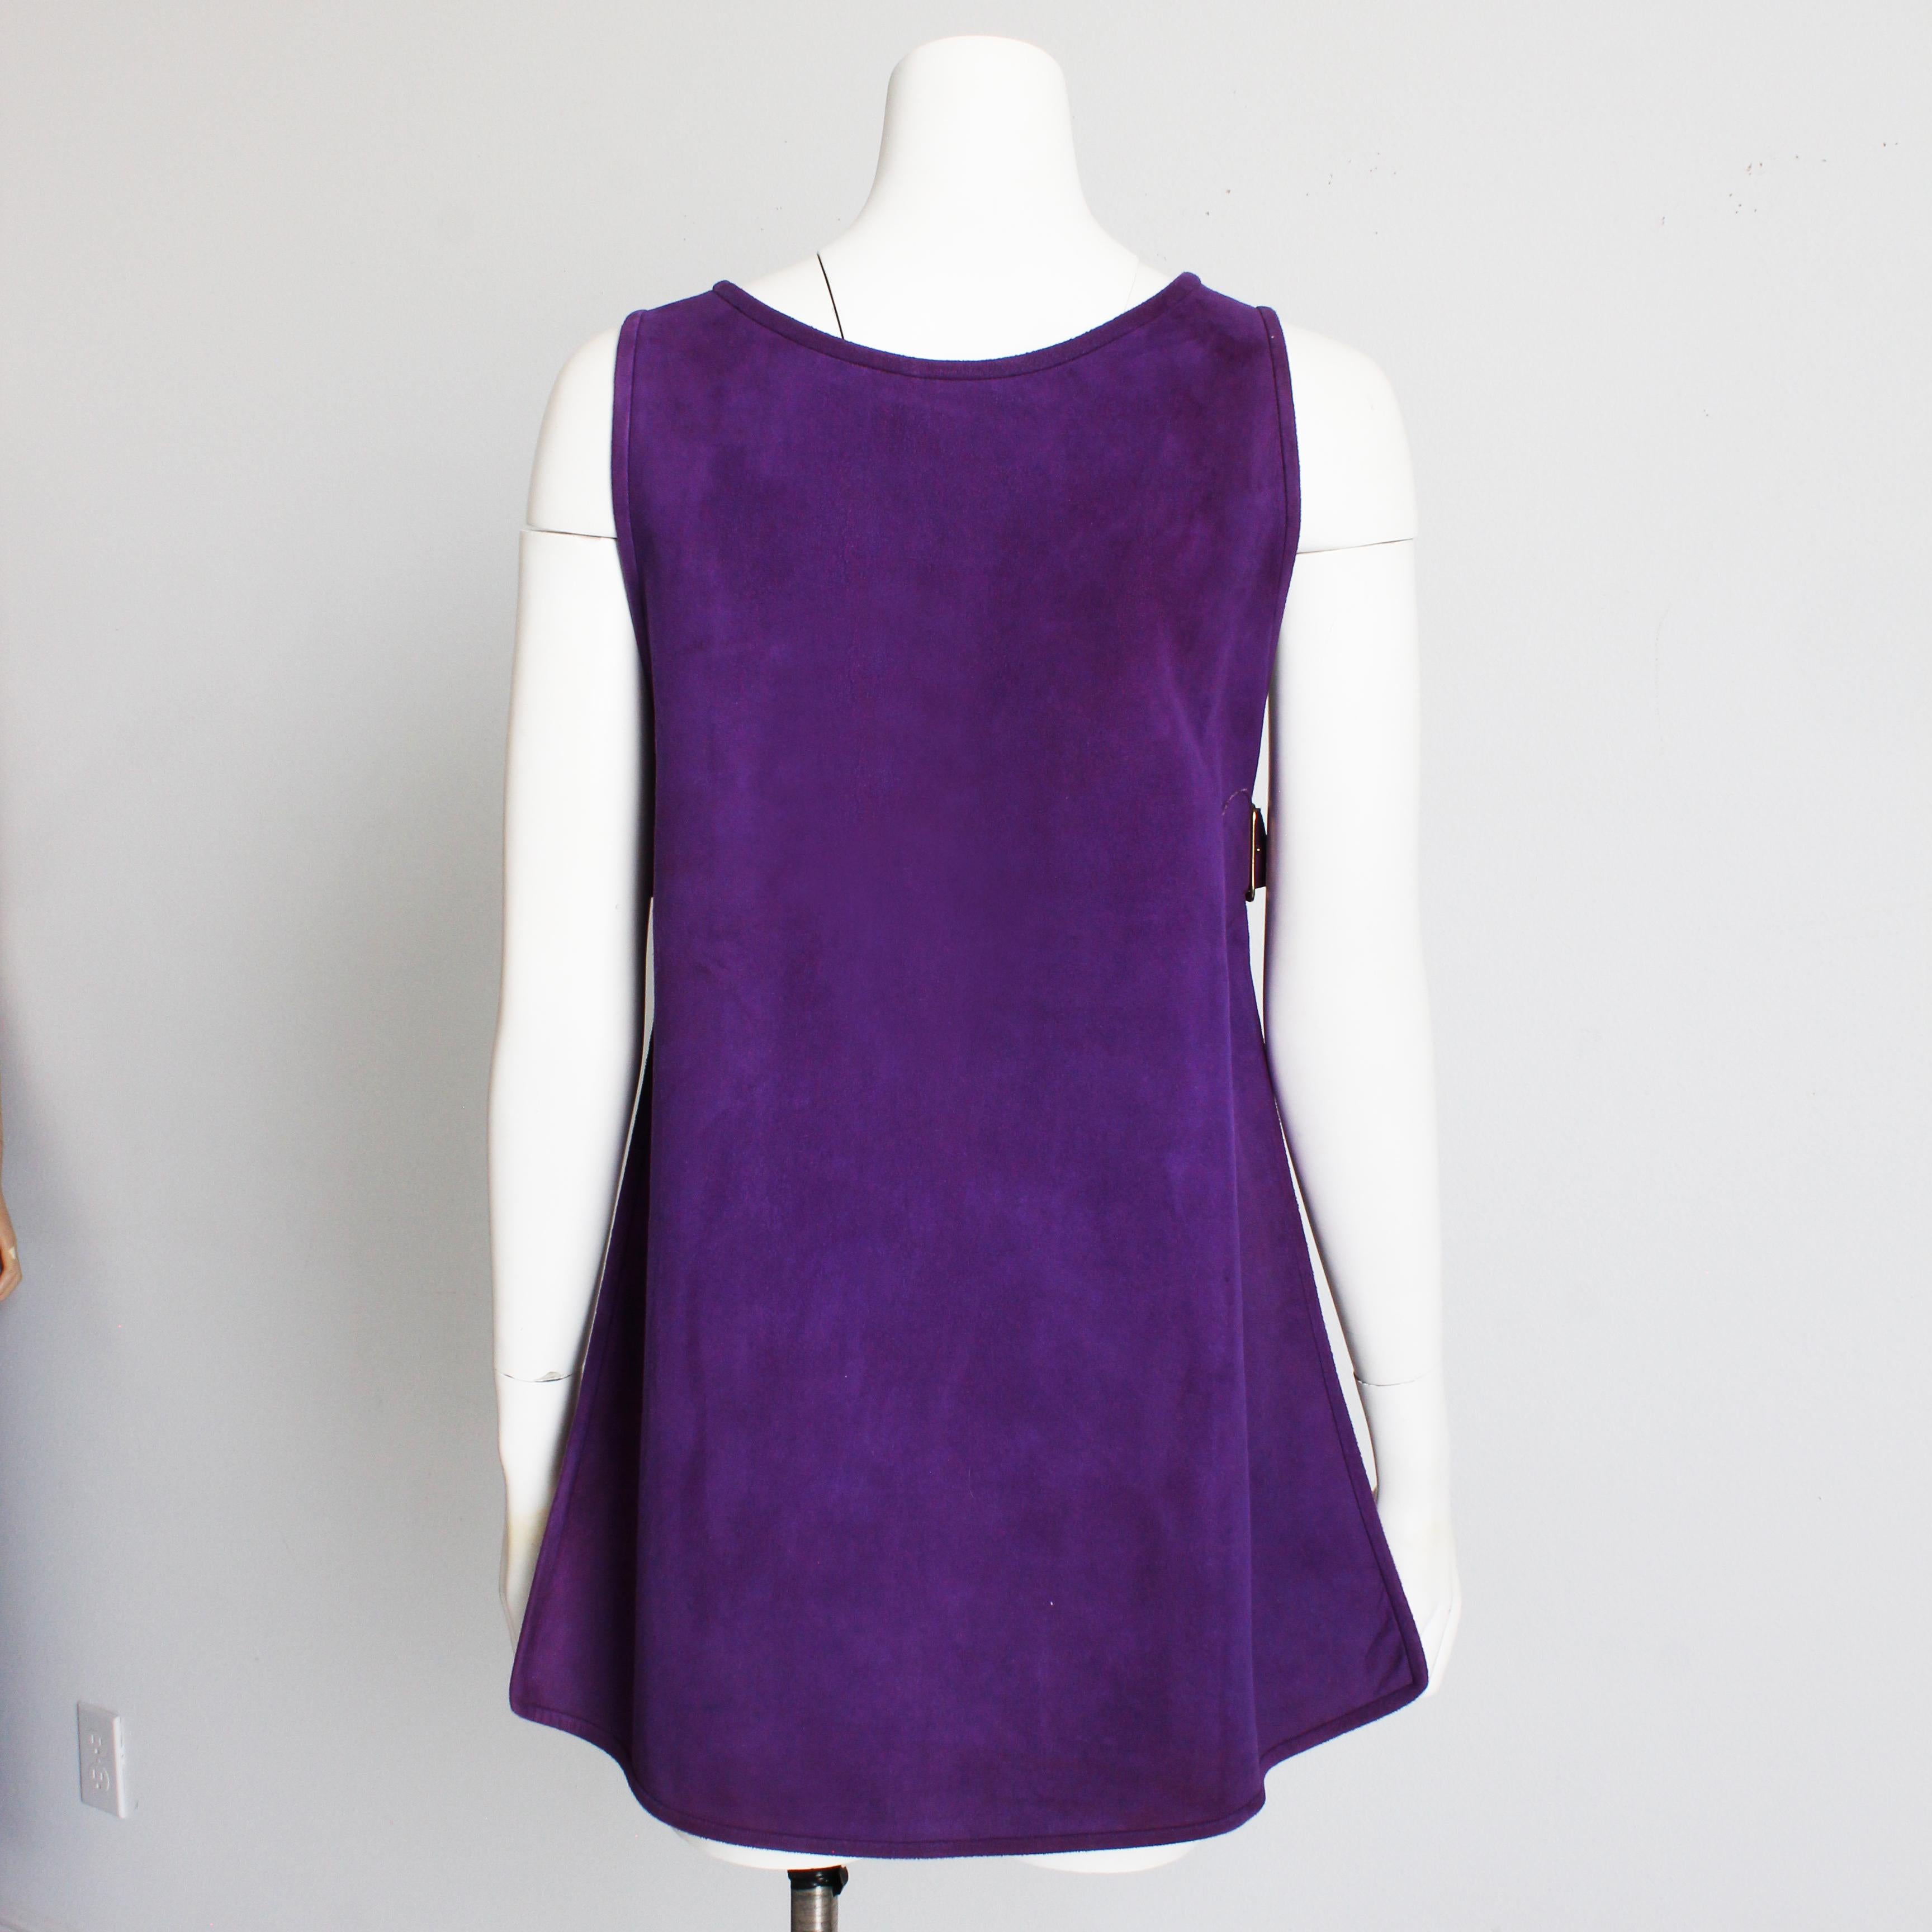 Bonnie Cashin for Sills Tunic Dress Lilac Suede Saks 5th Ave Vintage 60s NOS NWT For Sale 2